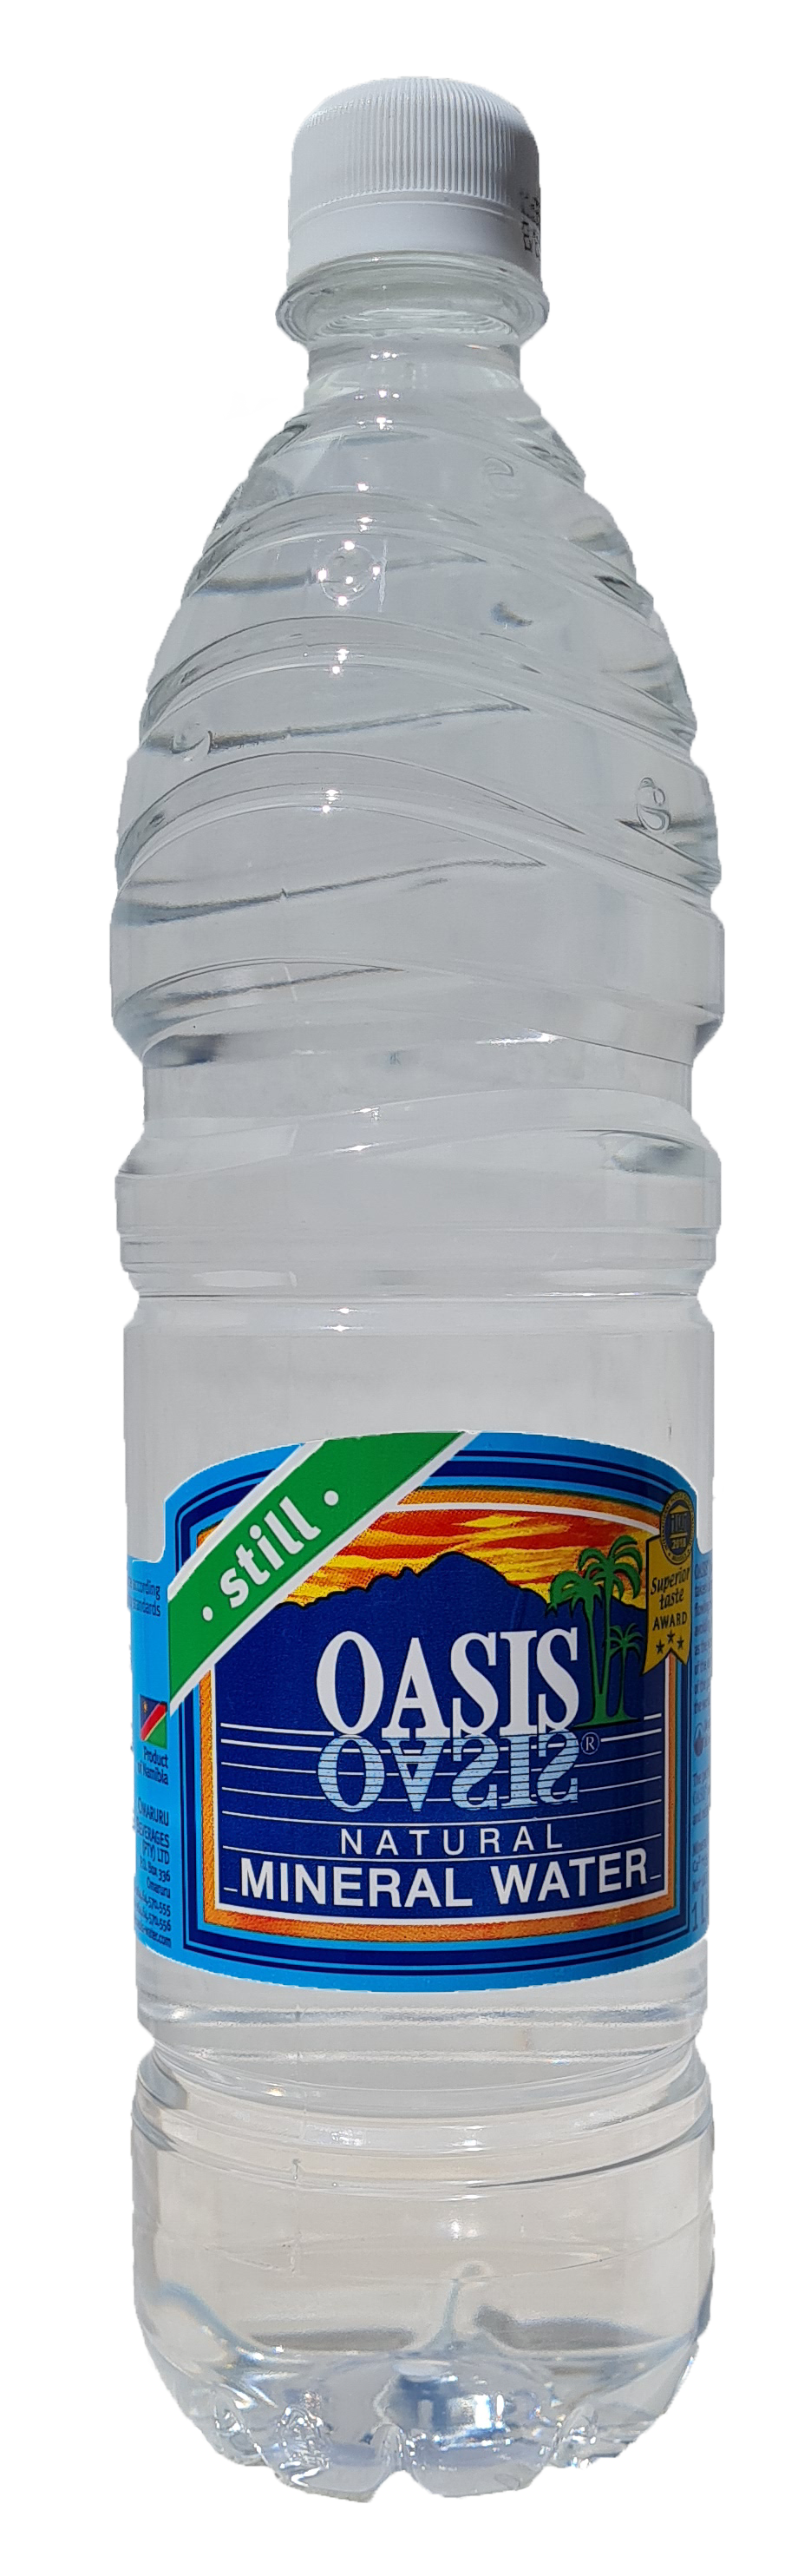 Bottle of still natural mineral water 1L